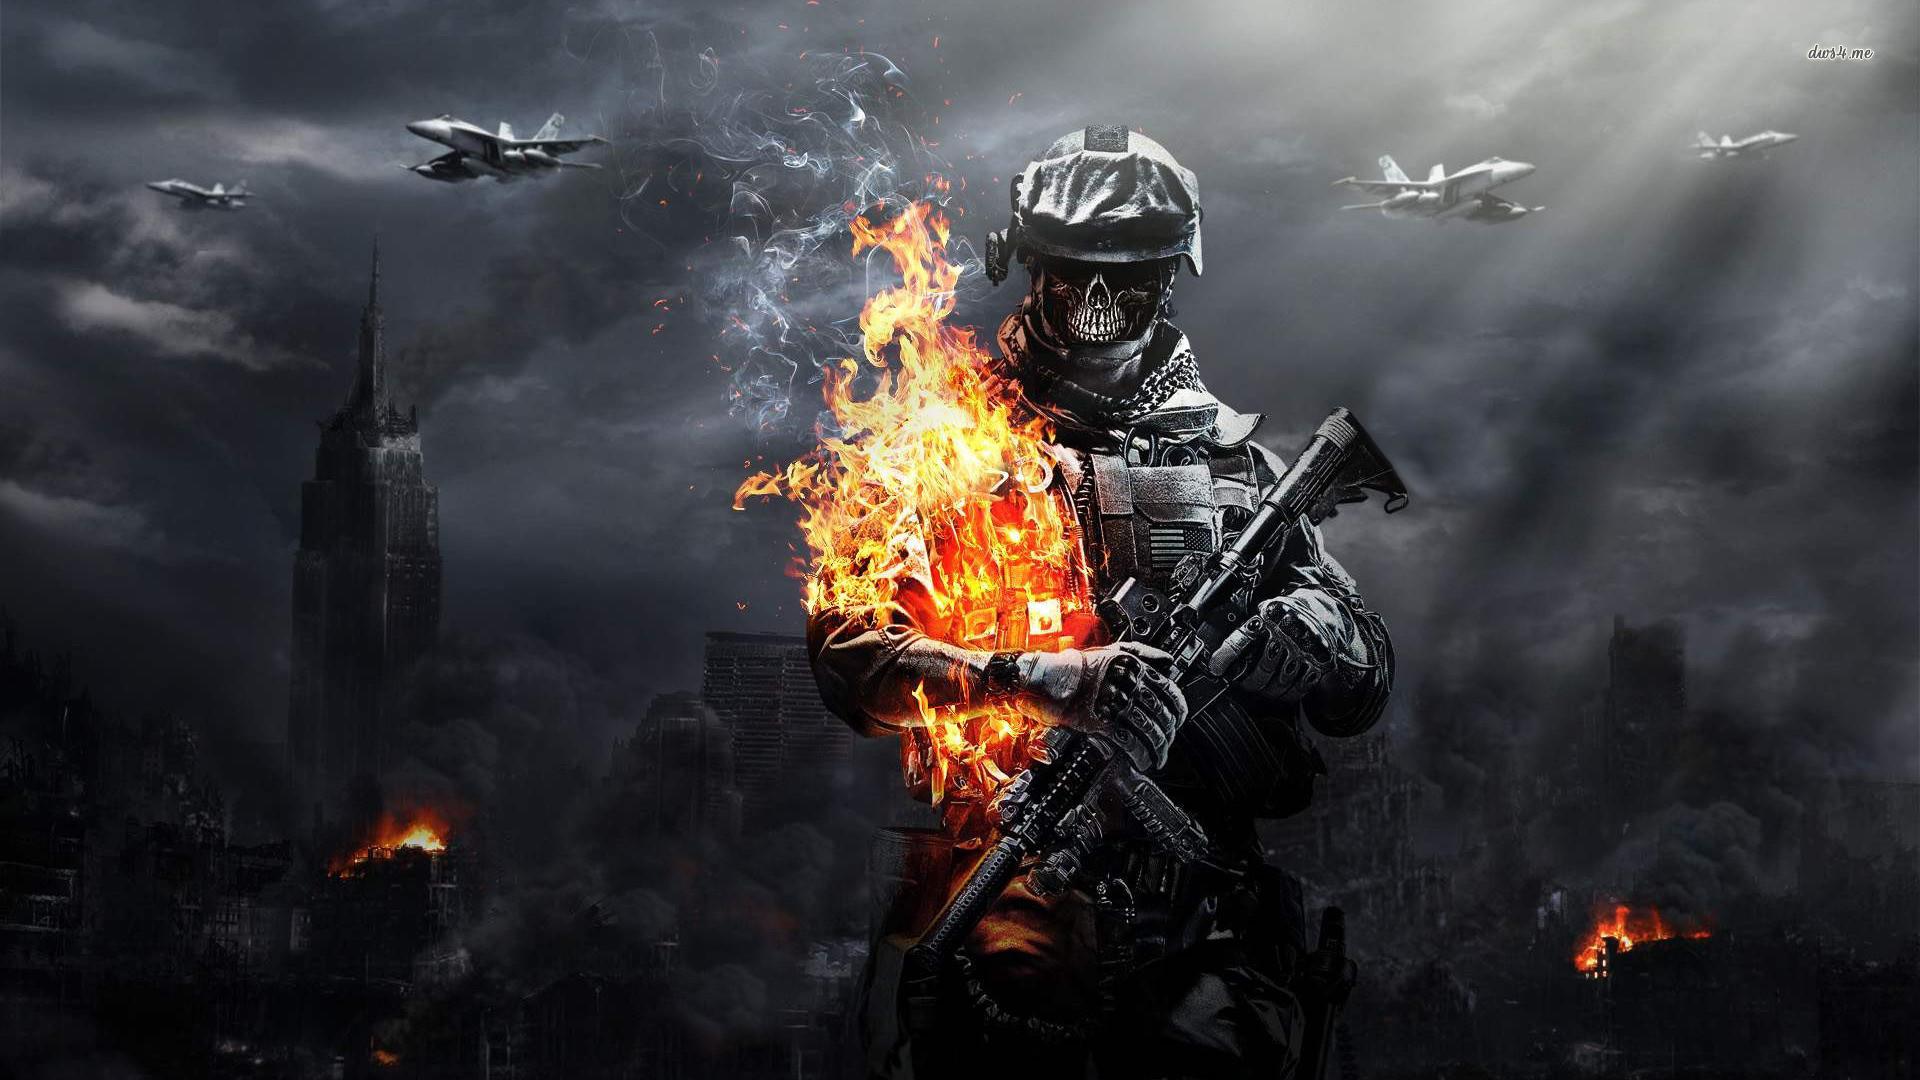 Cool Gaming Wallpapers Hd Resolution > Flip Wallpapers > Download